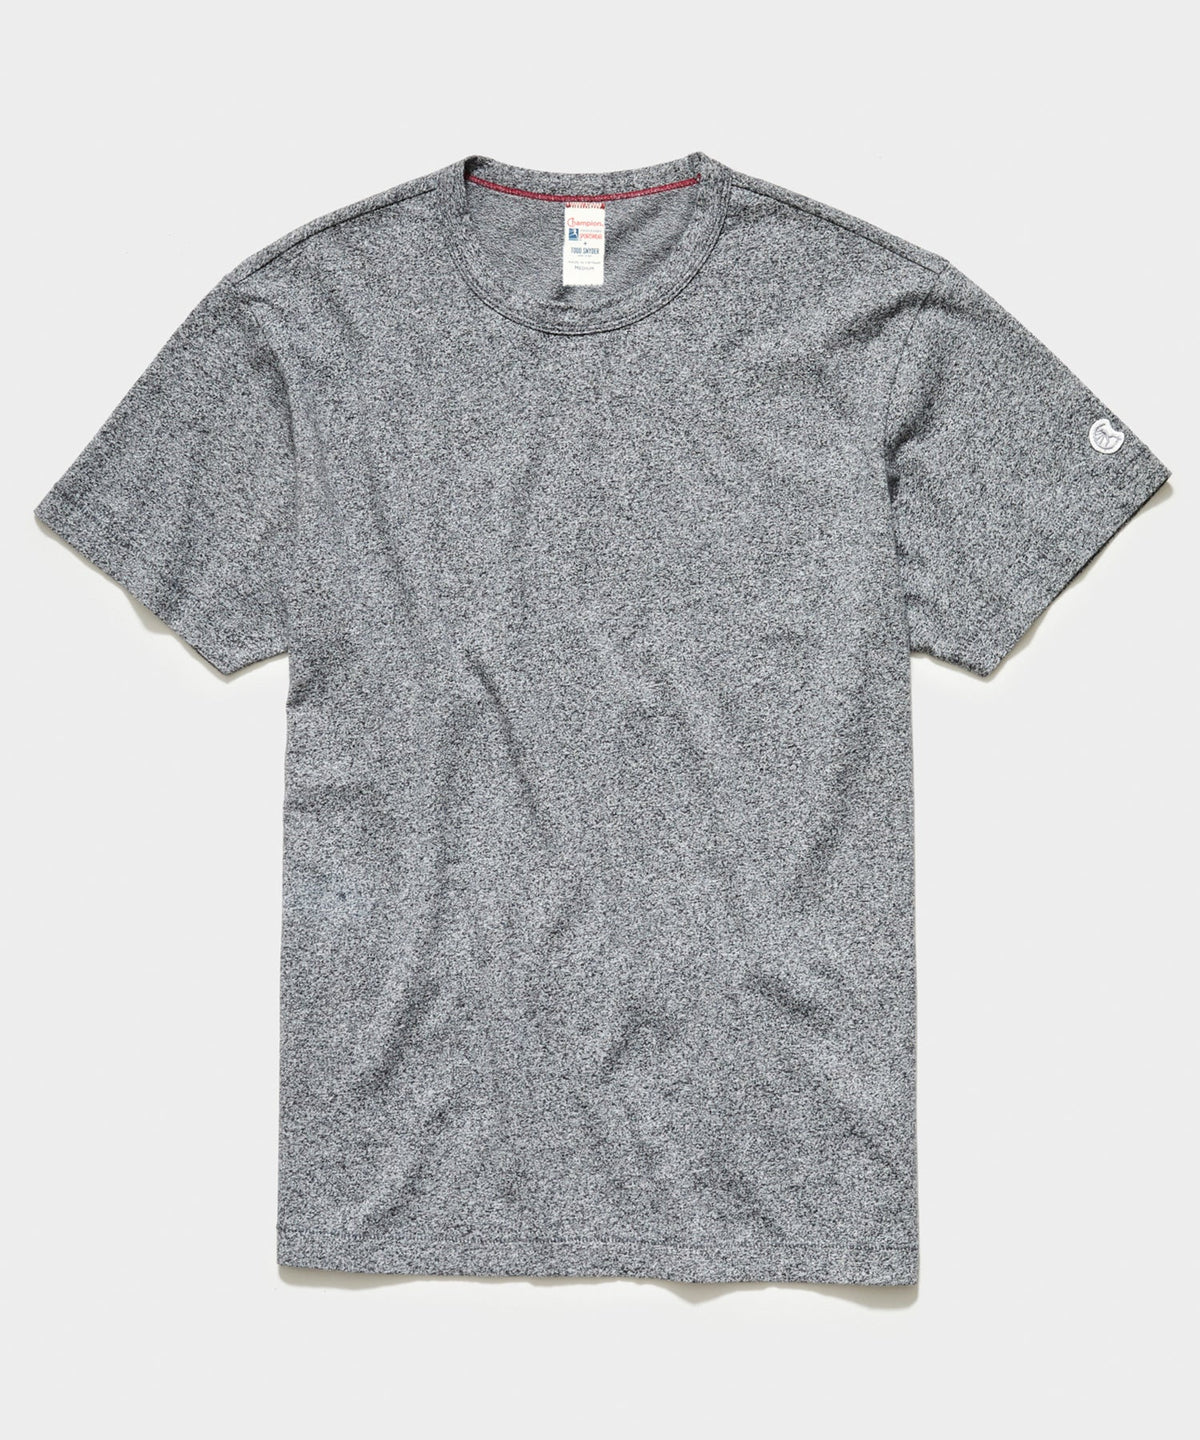 Champion Basic Jersey Tee in Salt and Pepper